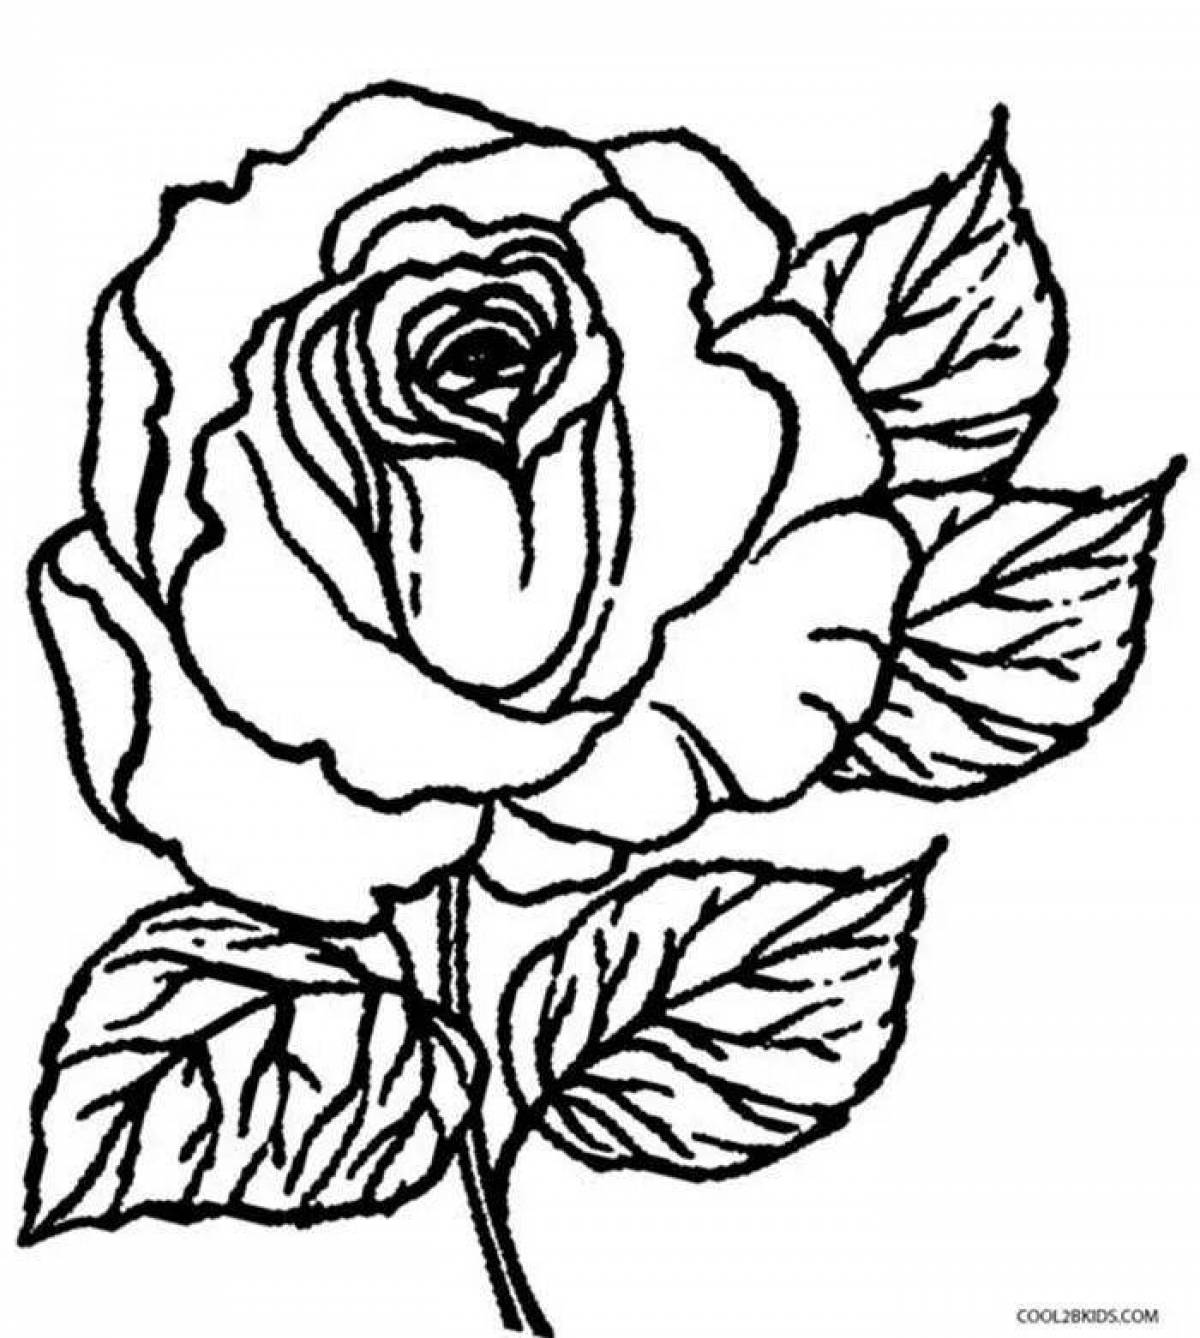 Glitter coloring picture of a rose